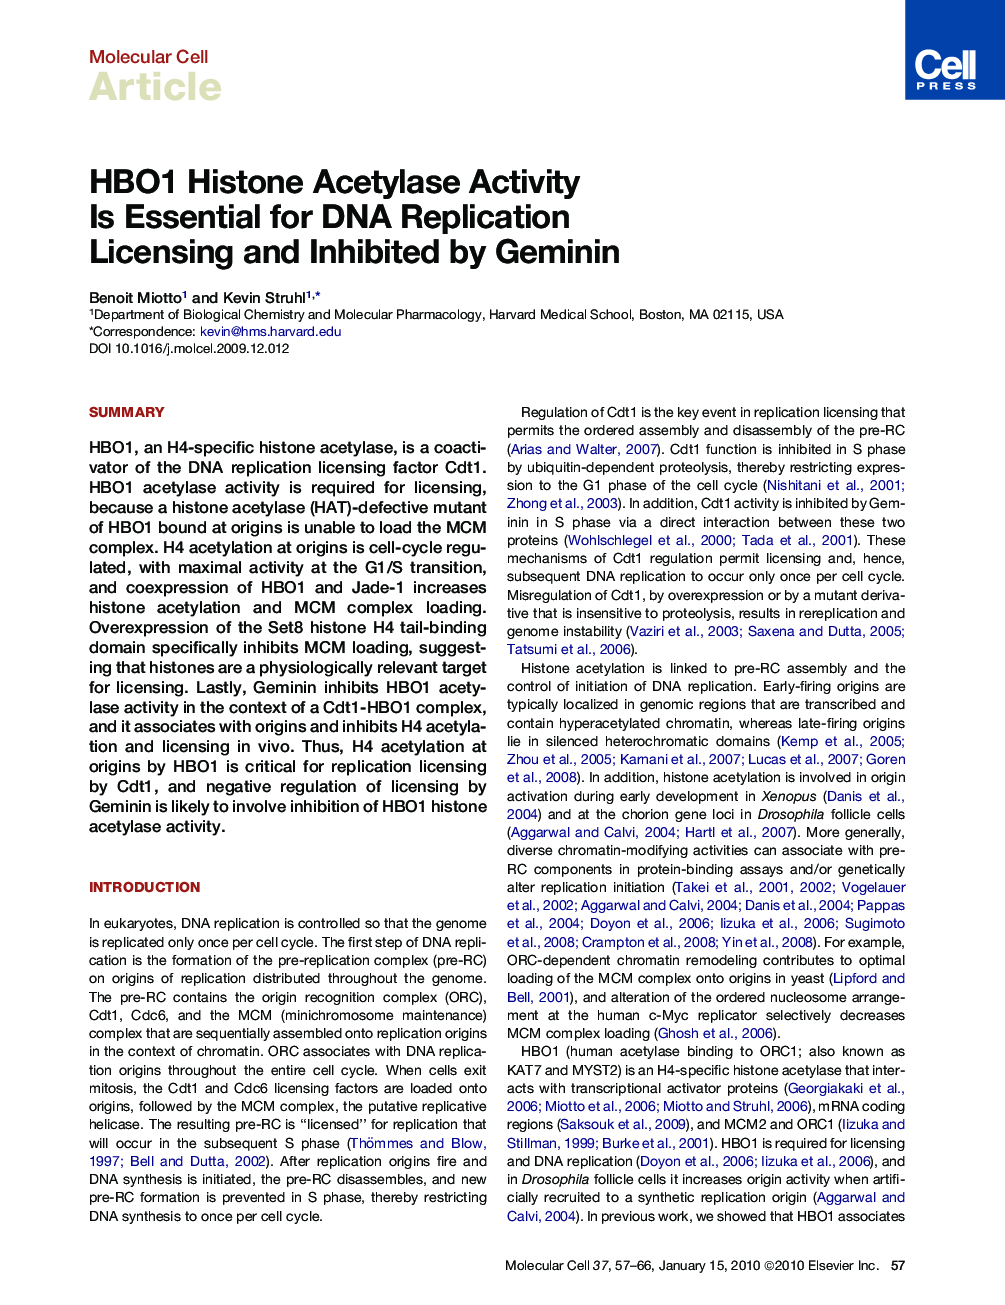 HBO1 Histone Acetylase Activity Is Essential for DNA Replication Licensing and Inhibited by Geminin